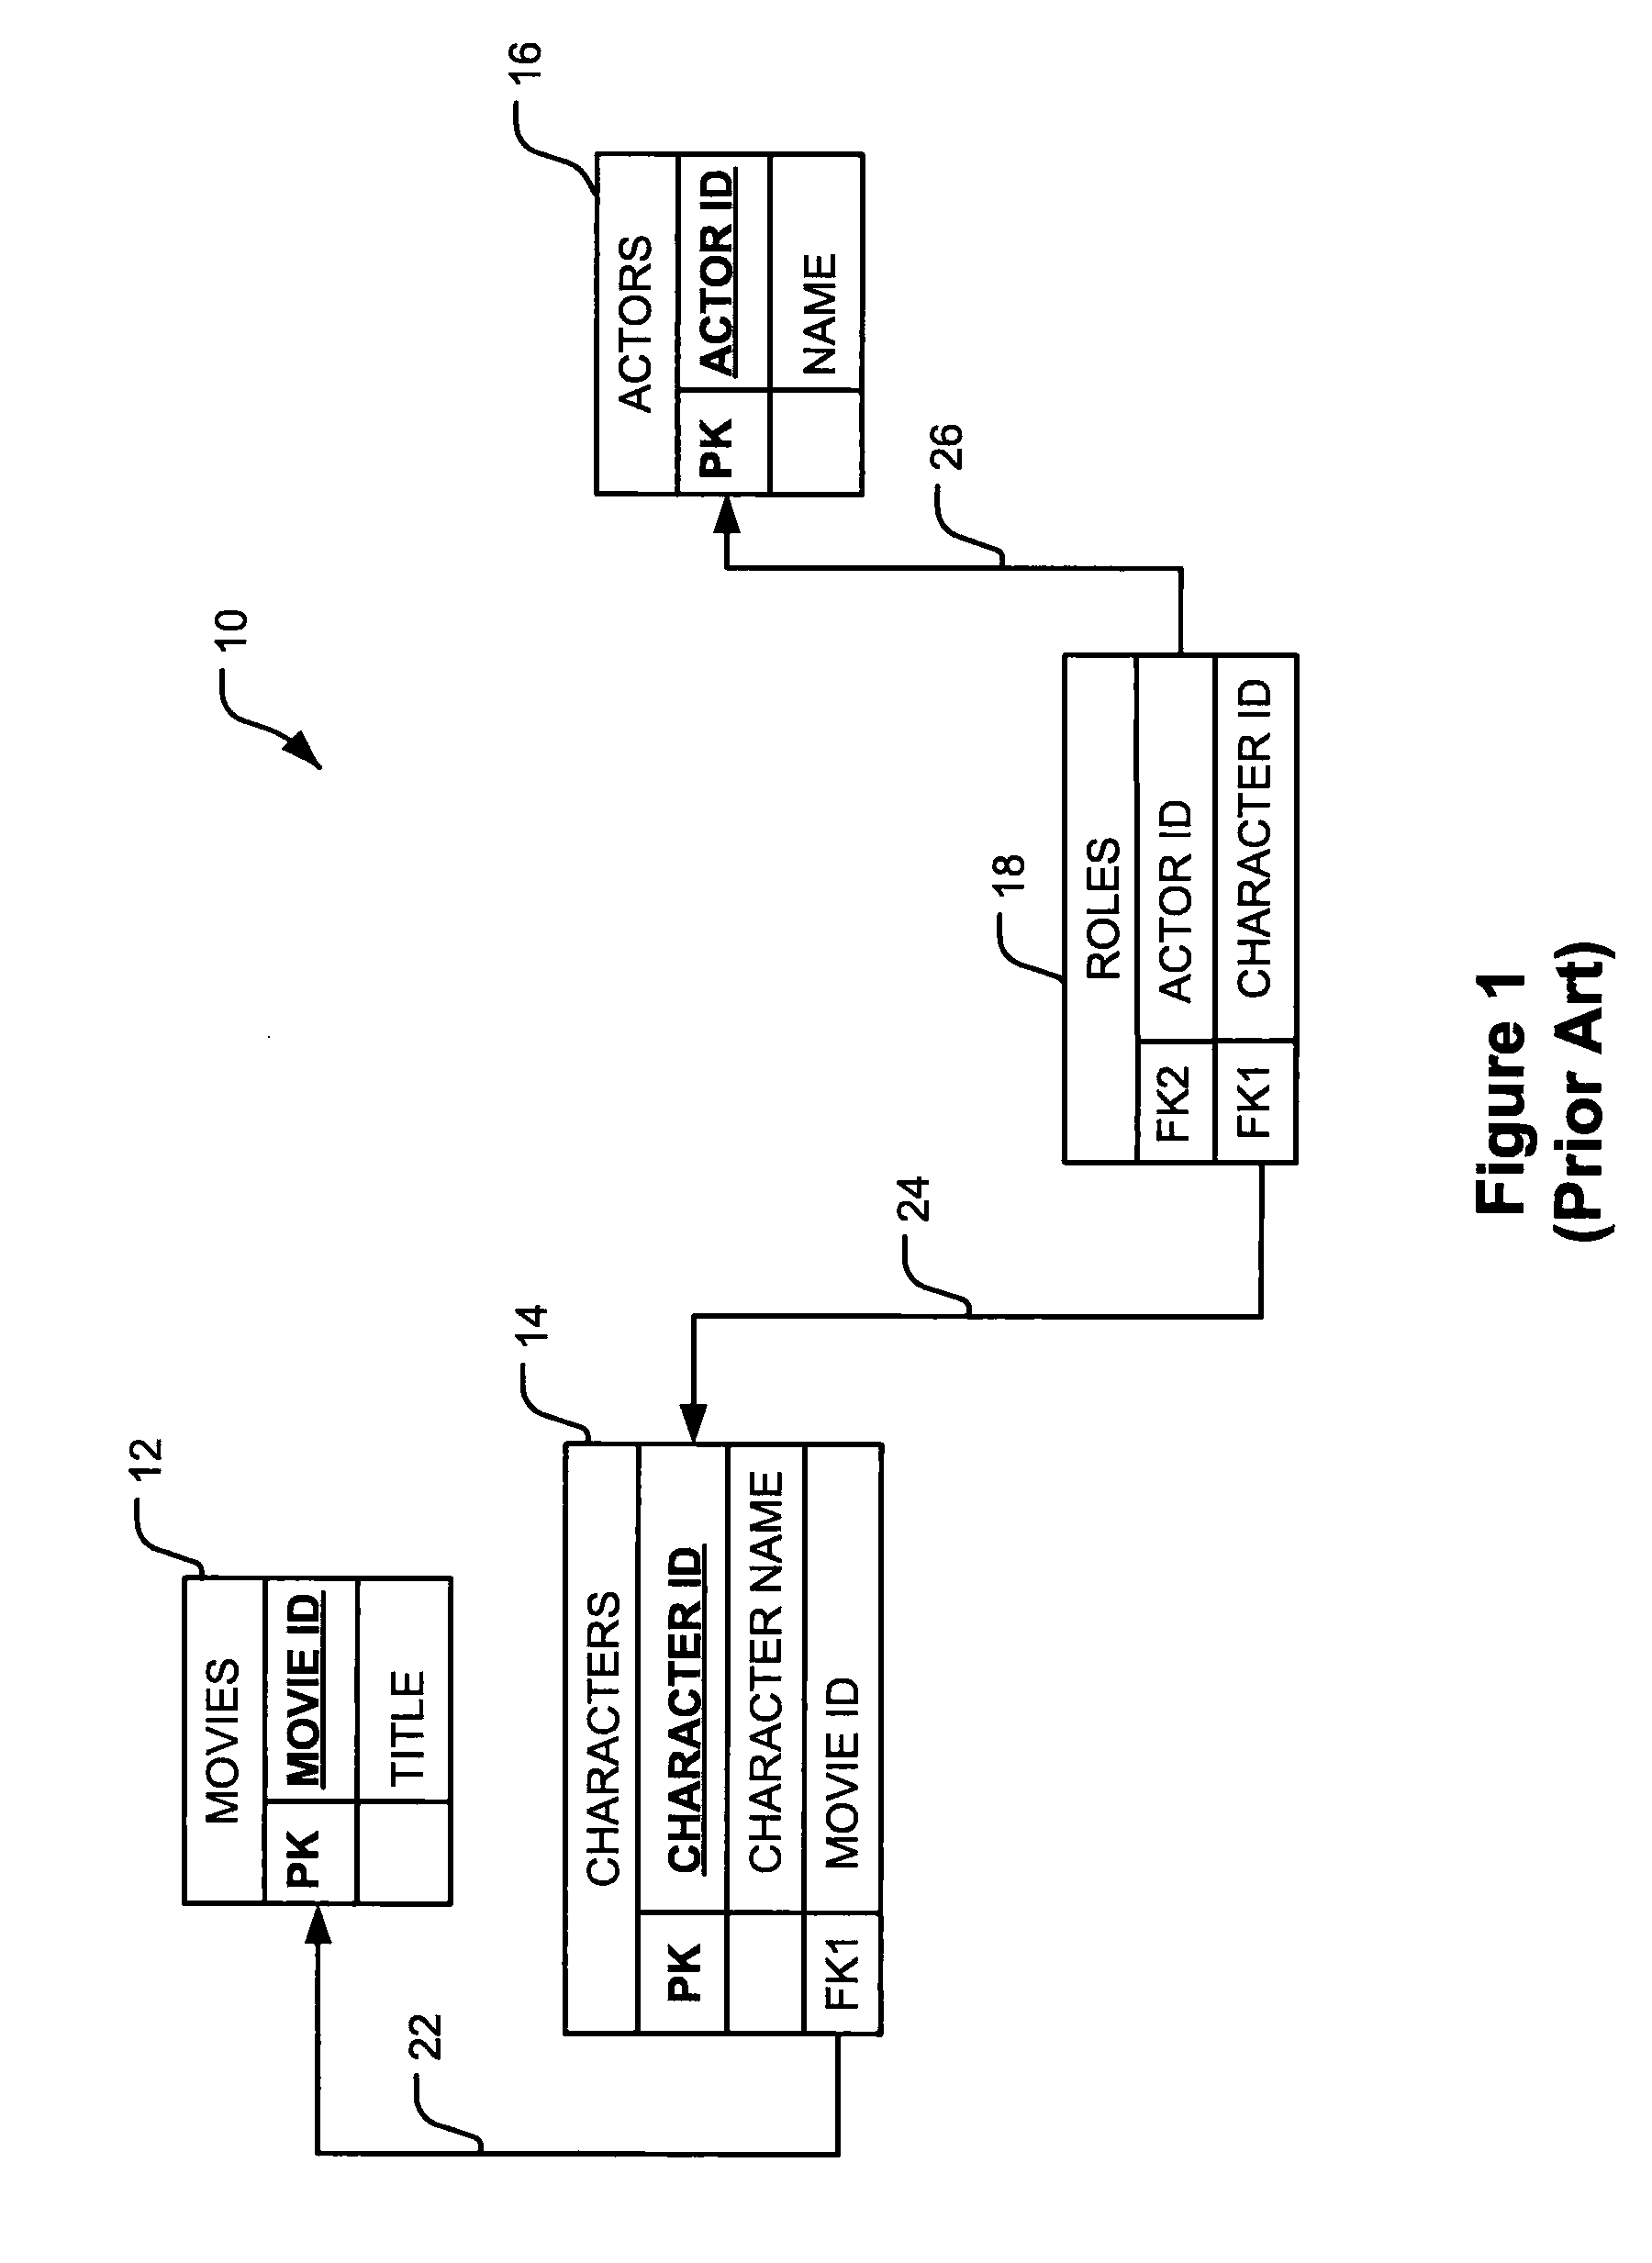 Database system storing a data structure that includes data nodes connected by context nodes and related method